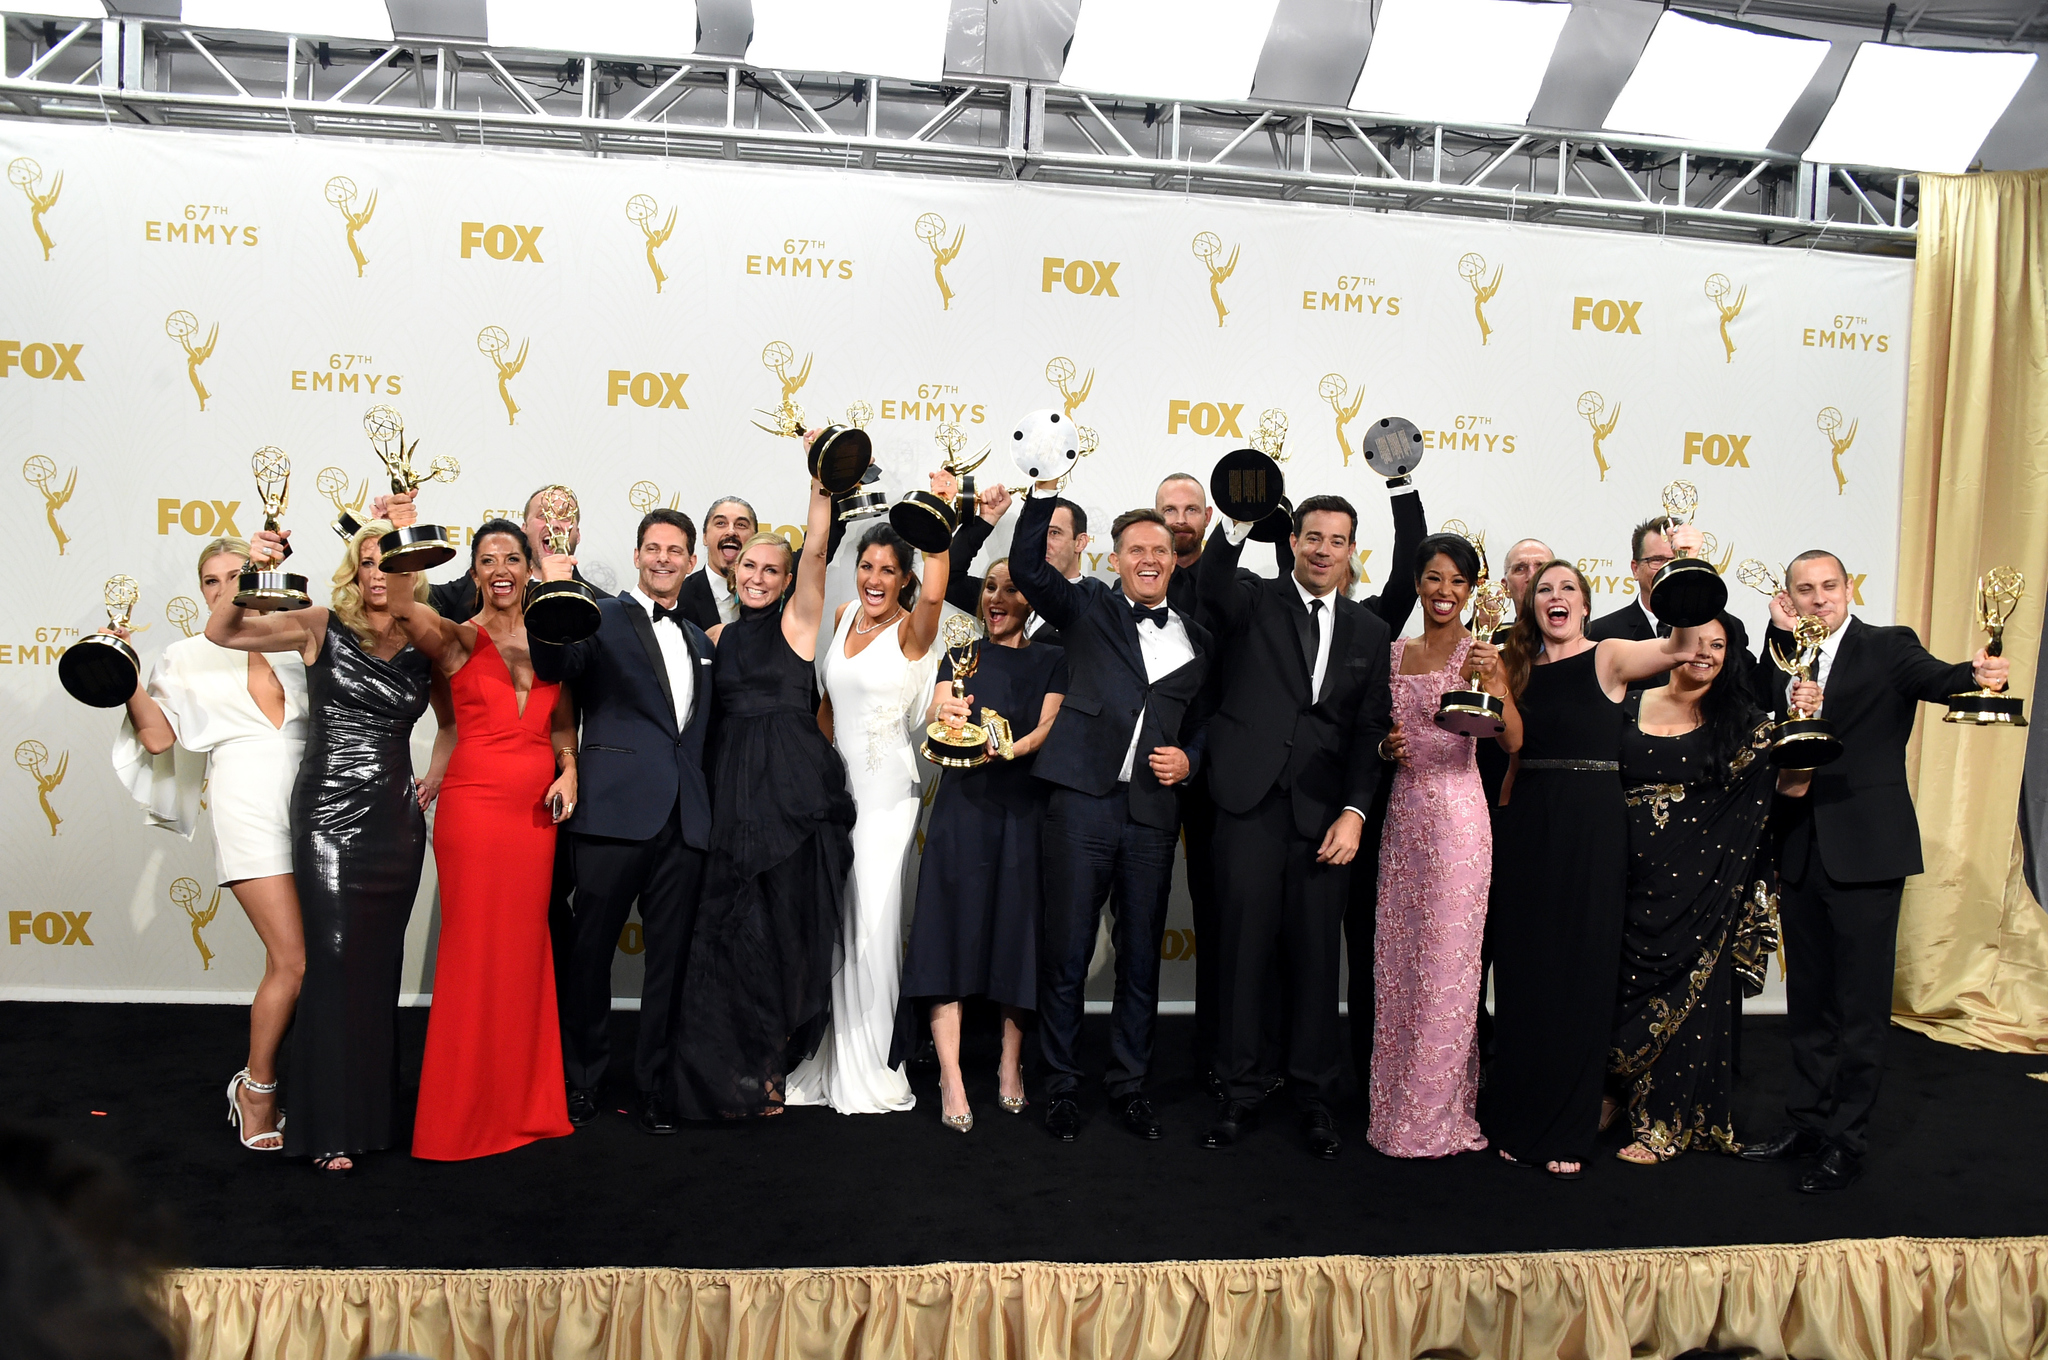 Carson Daly, Mark Burnett, Lee Metzger, Audrey Morrissey, Amanda Zucker, Ashley Baumann, Chad Hines and Michelle McNulty at event of The 67th Primetime Emmy Awards (2015)